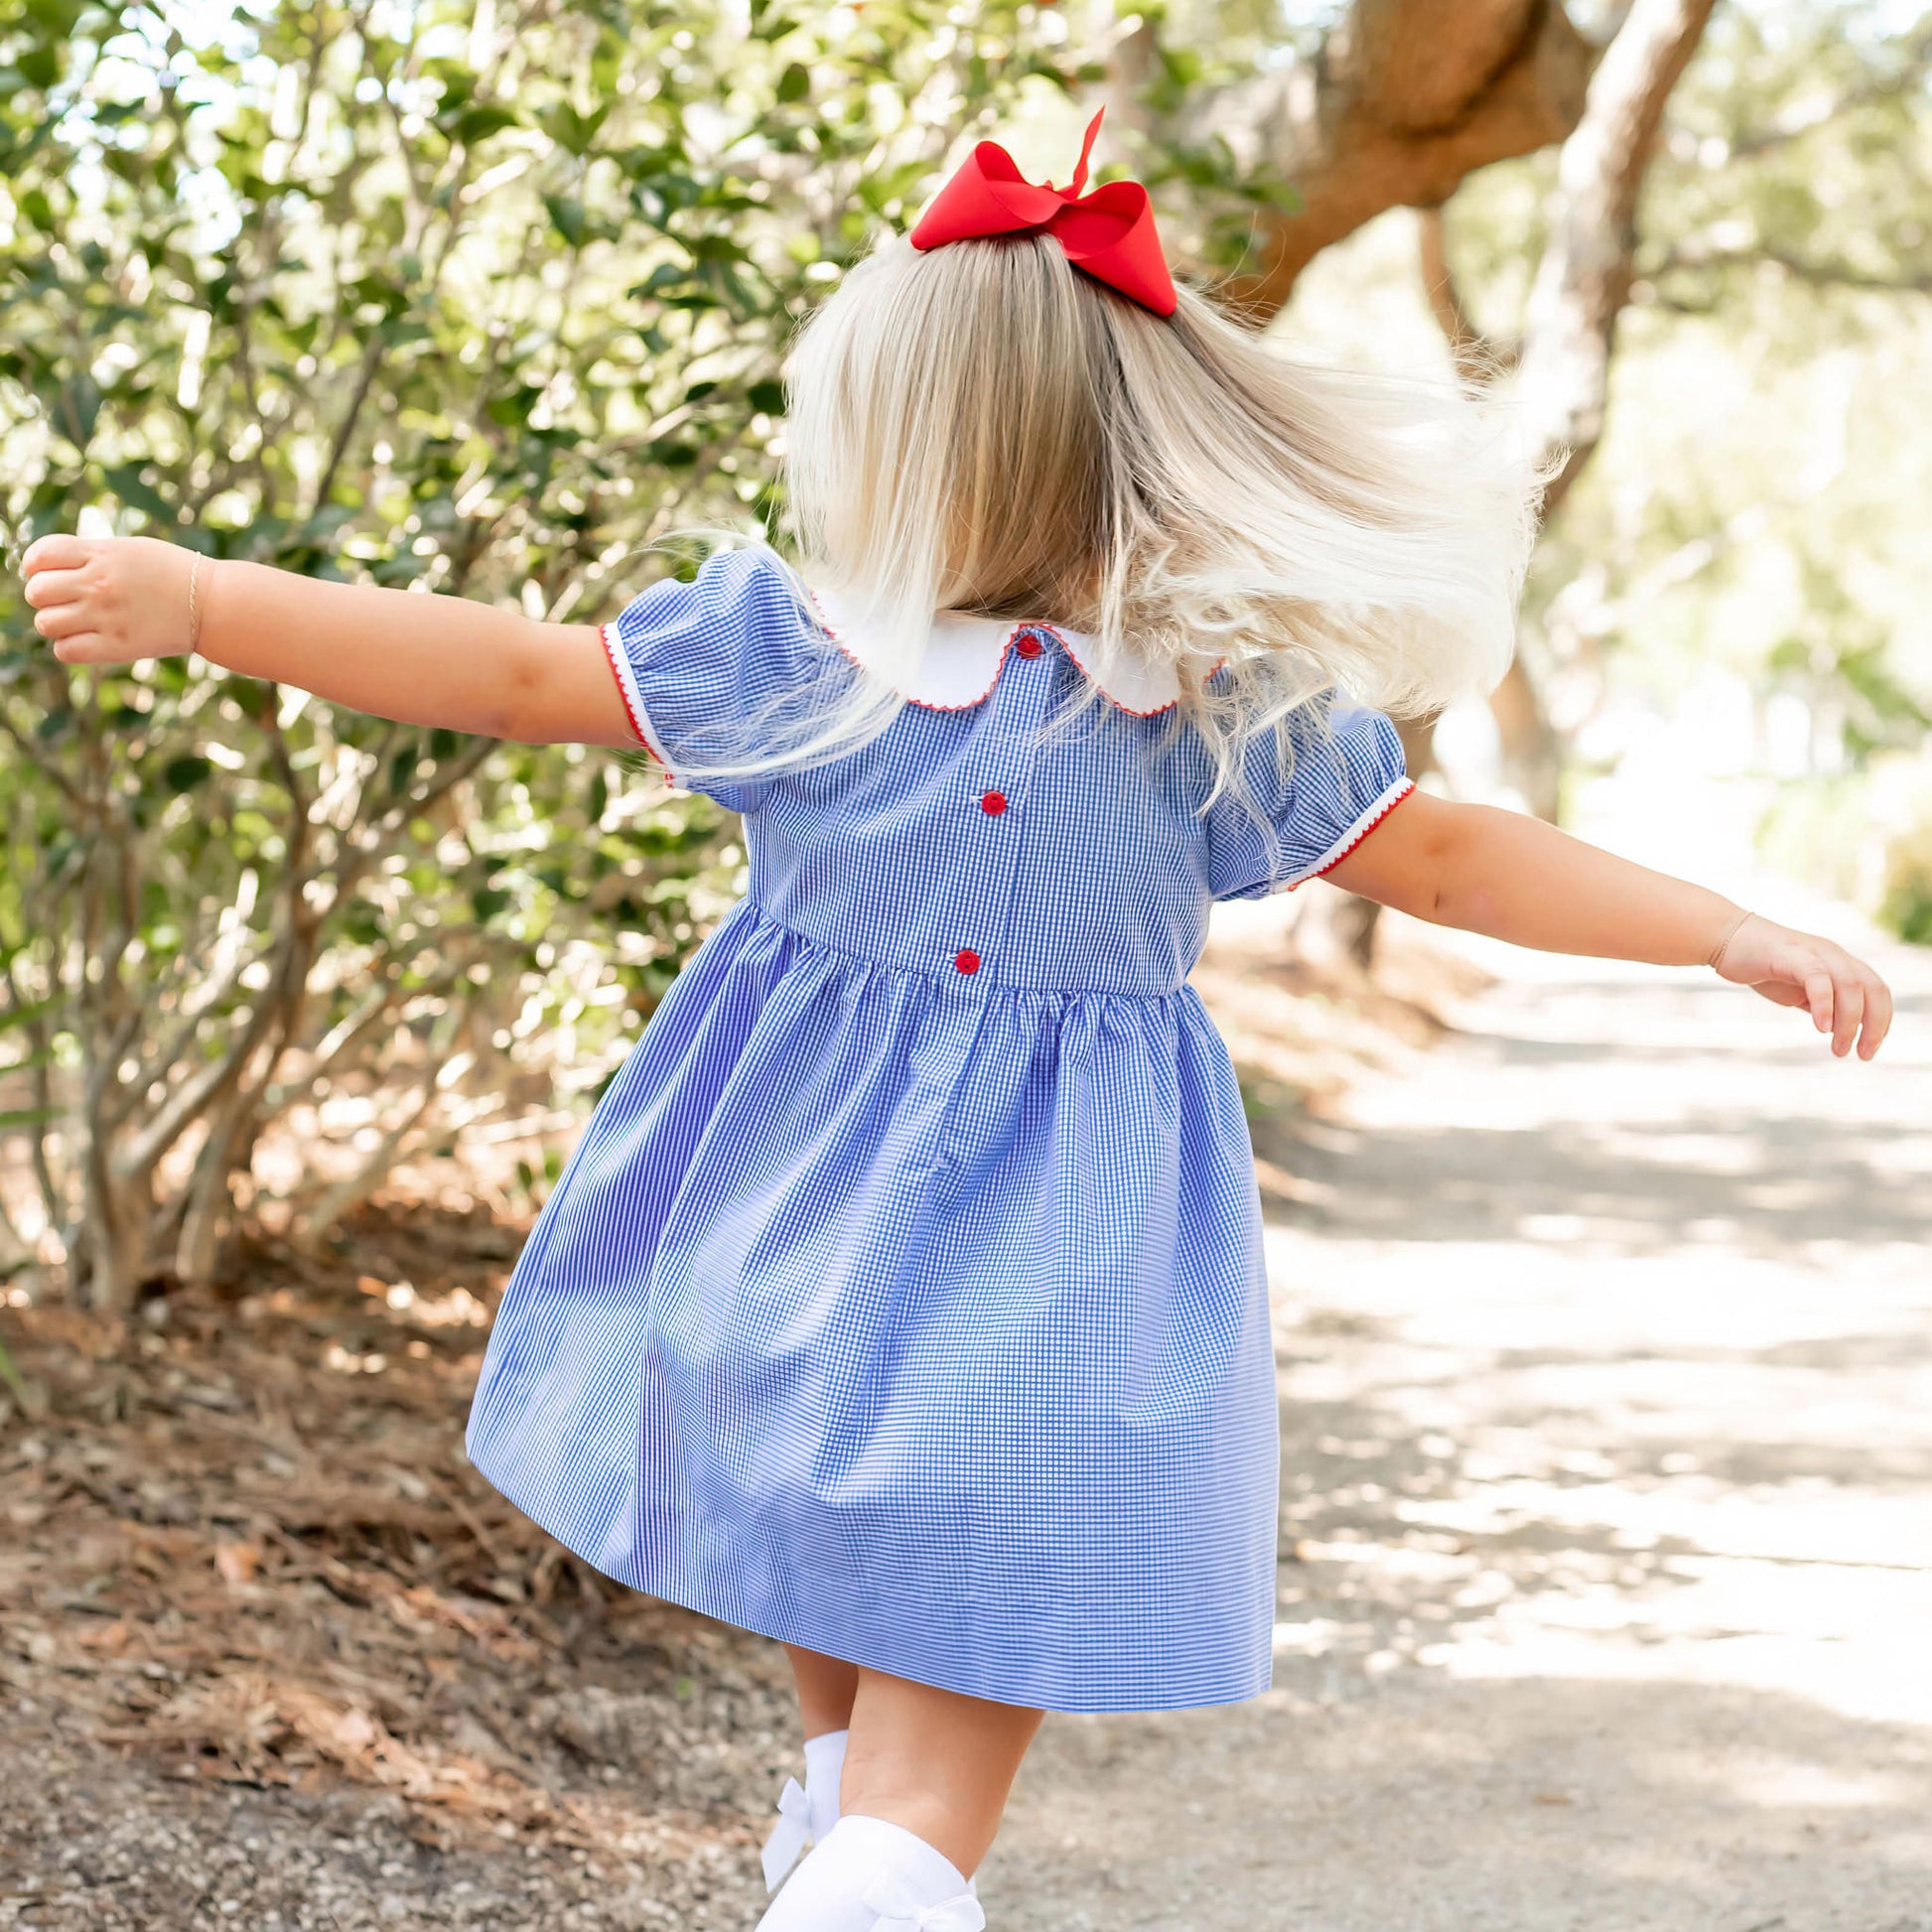 Affordable Smocked Baby + Girls' Dresses from